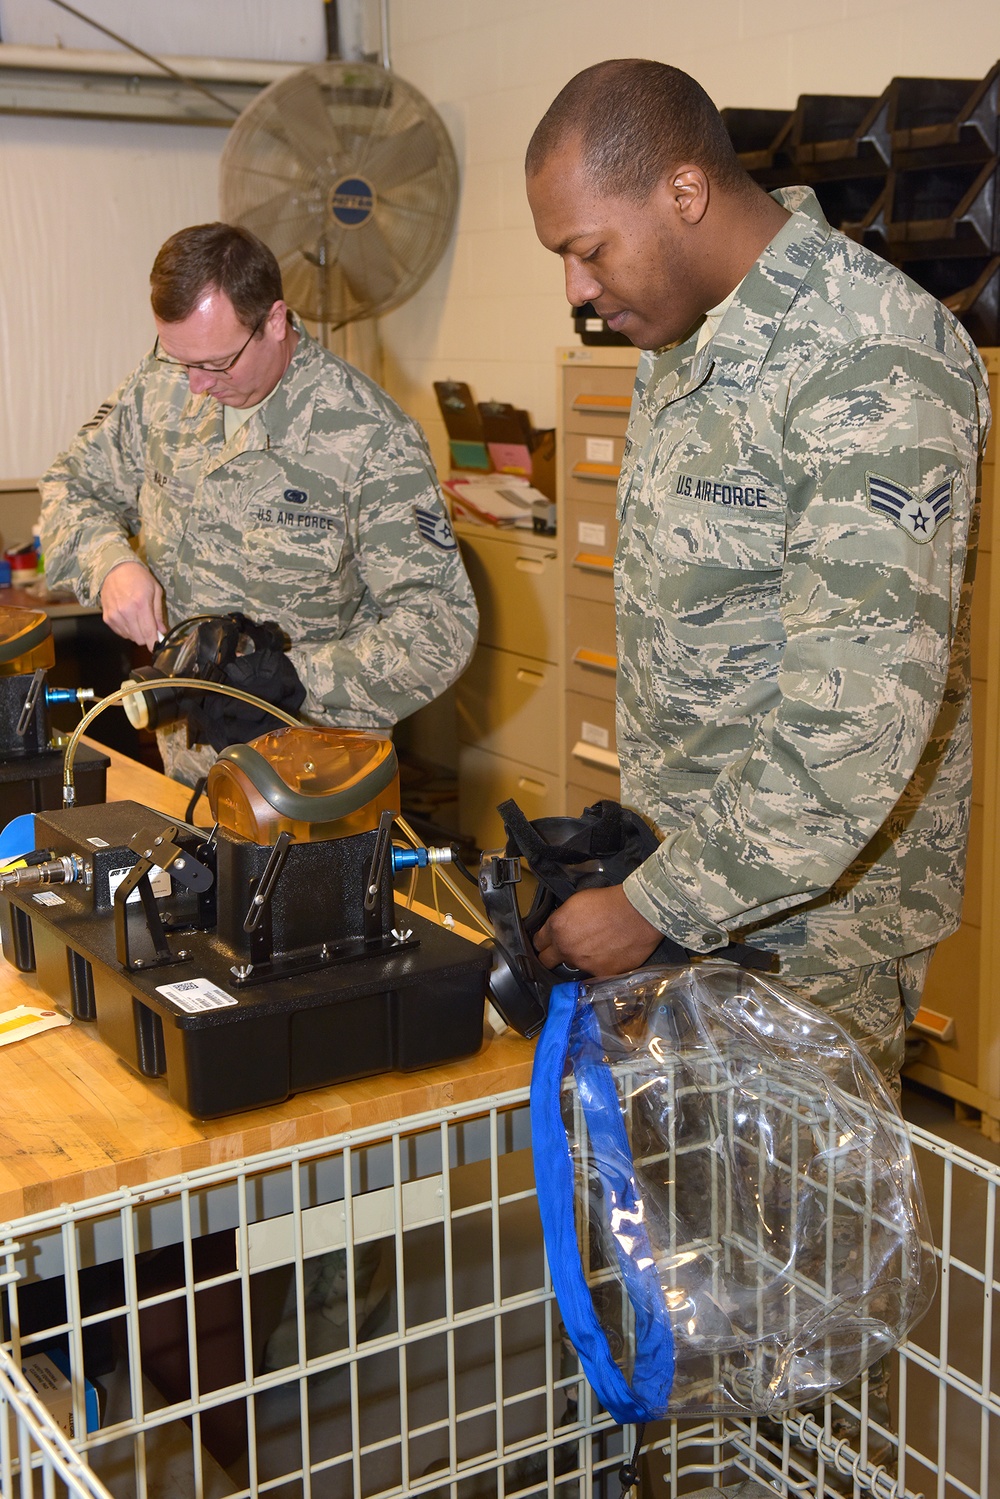 Airman perform gas mask evaluation